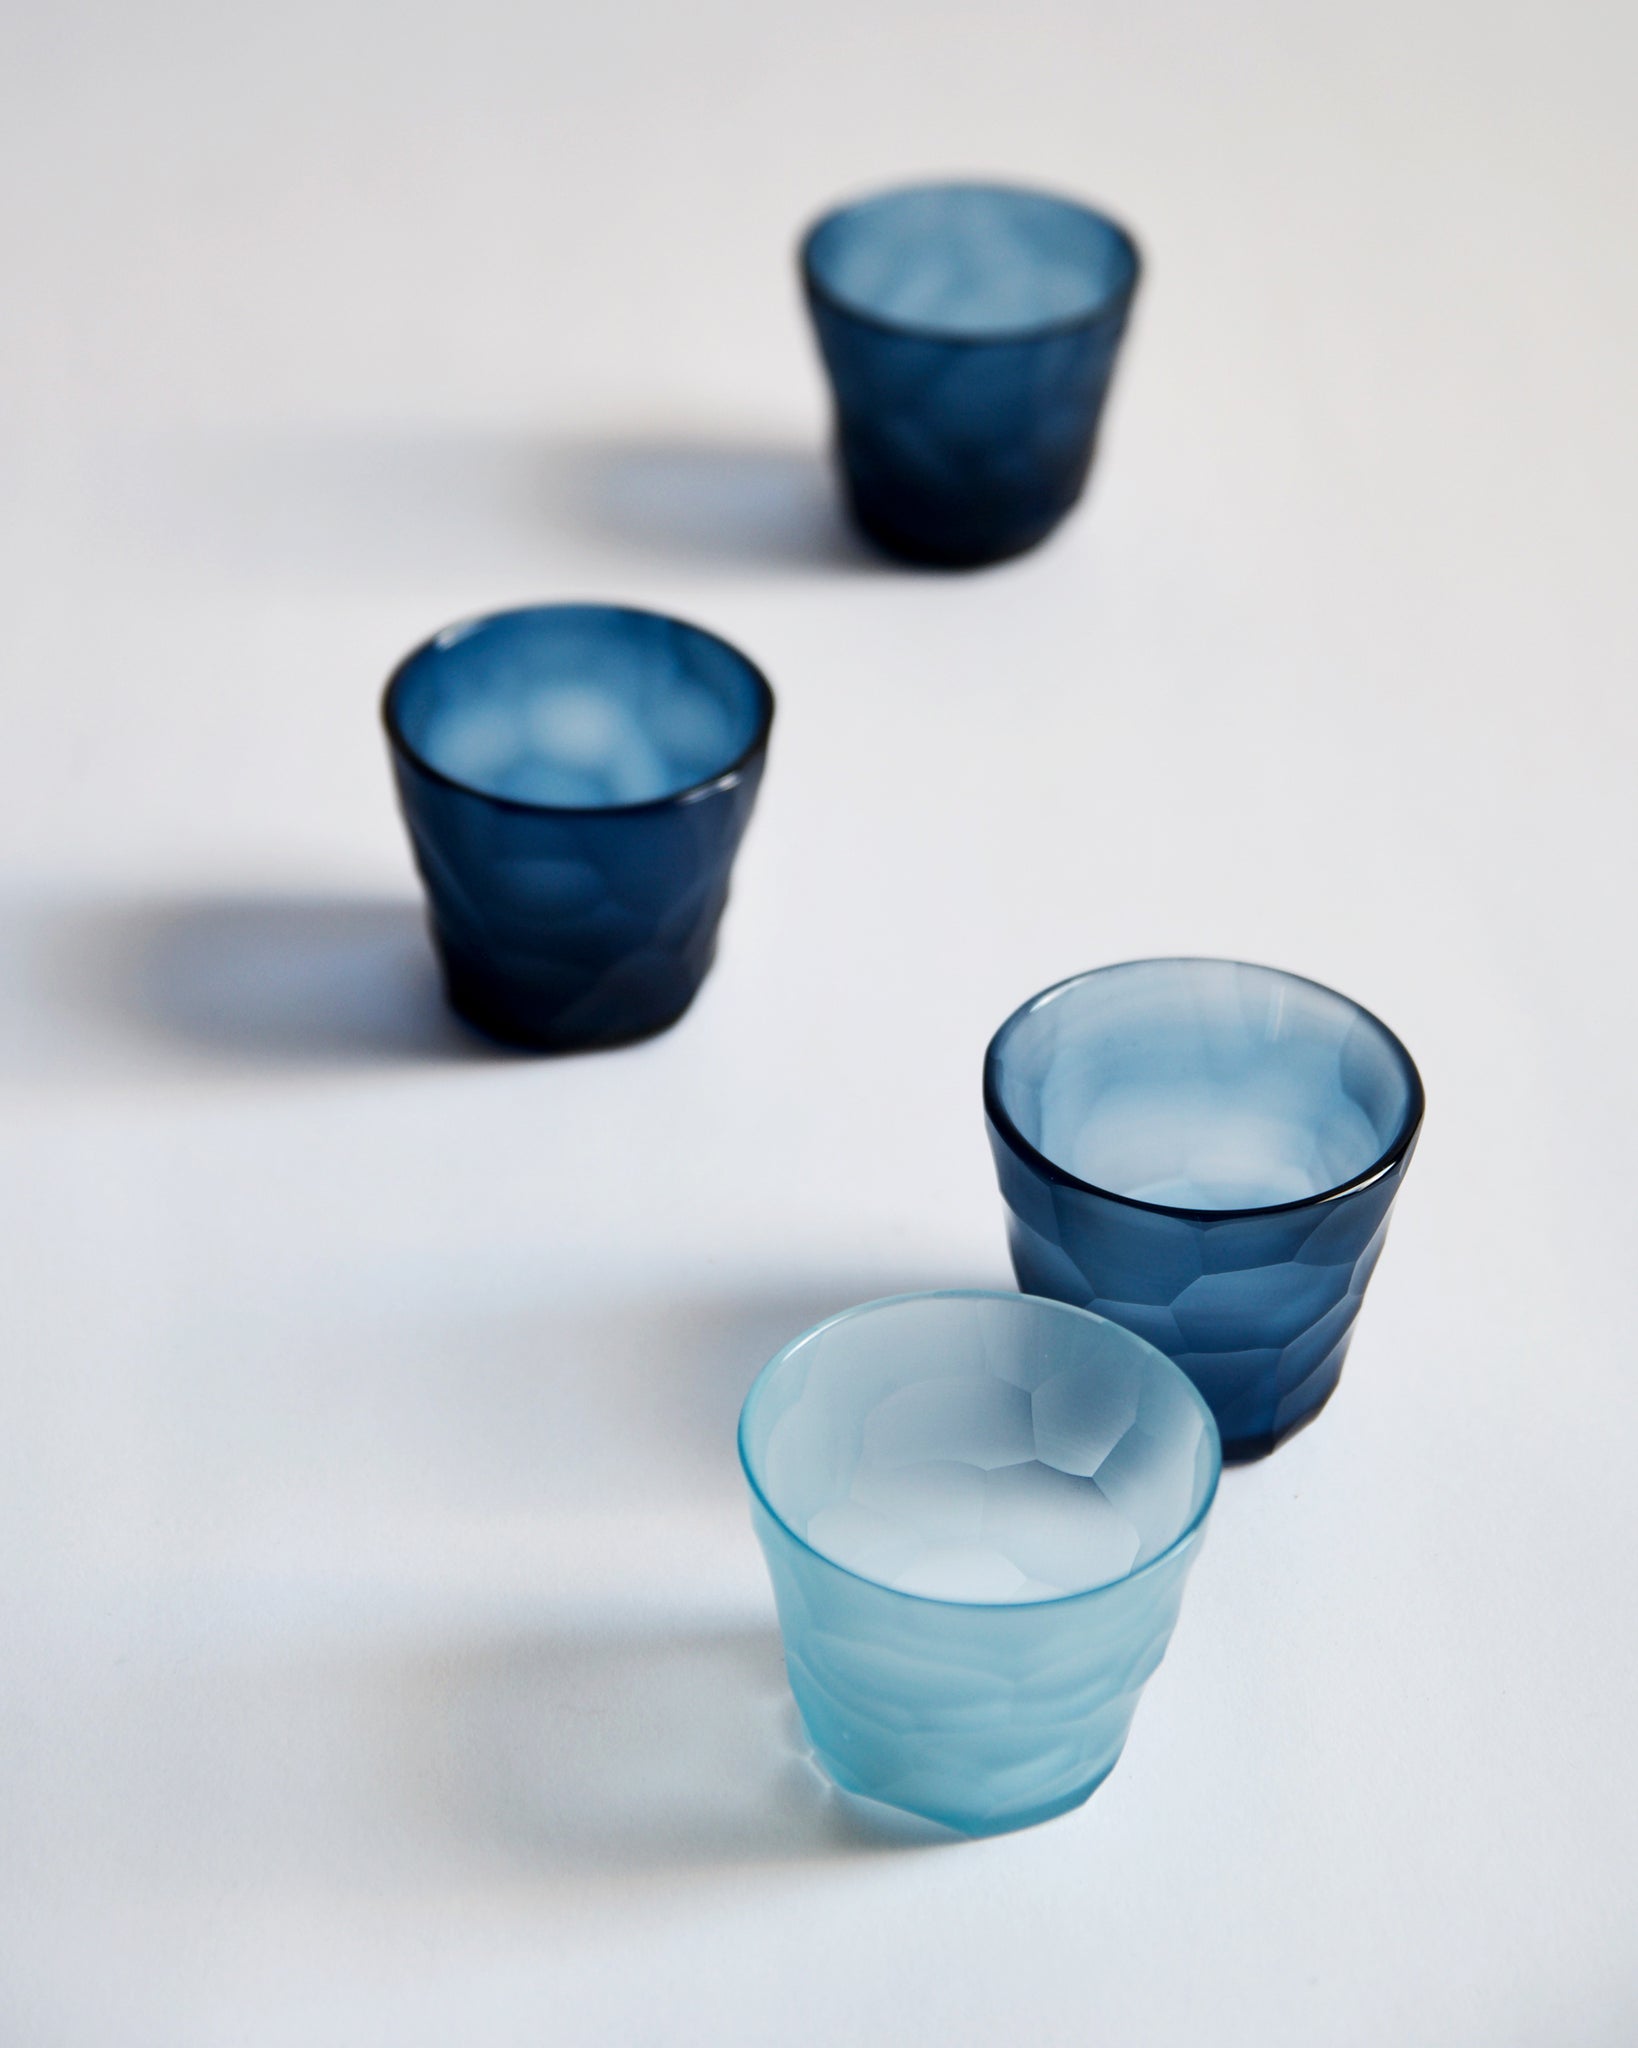 Top view of four reclaimed blue mini choko glasses in different shades randomly placed.